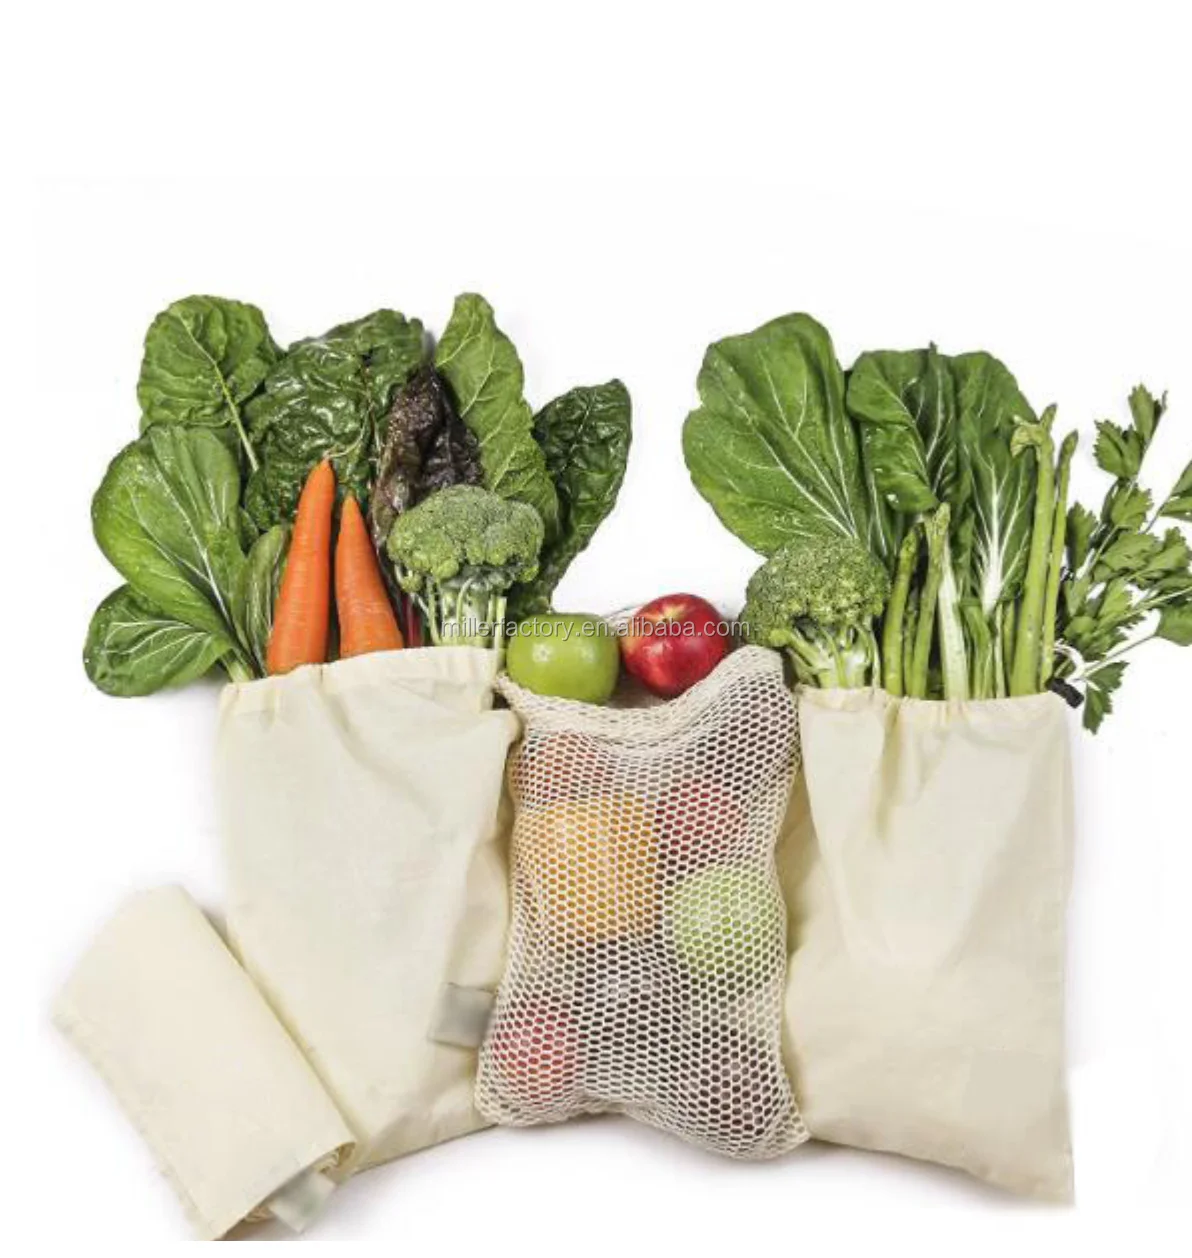 Produce Bags Organic Cotton Mesh Bag Fruit Veggie Bags With Pouch - Buy ...